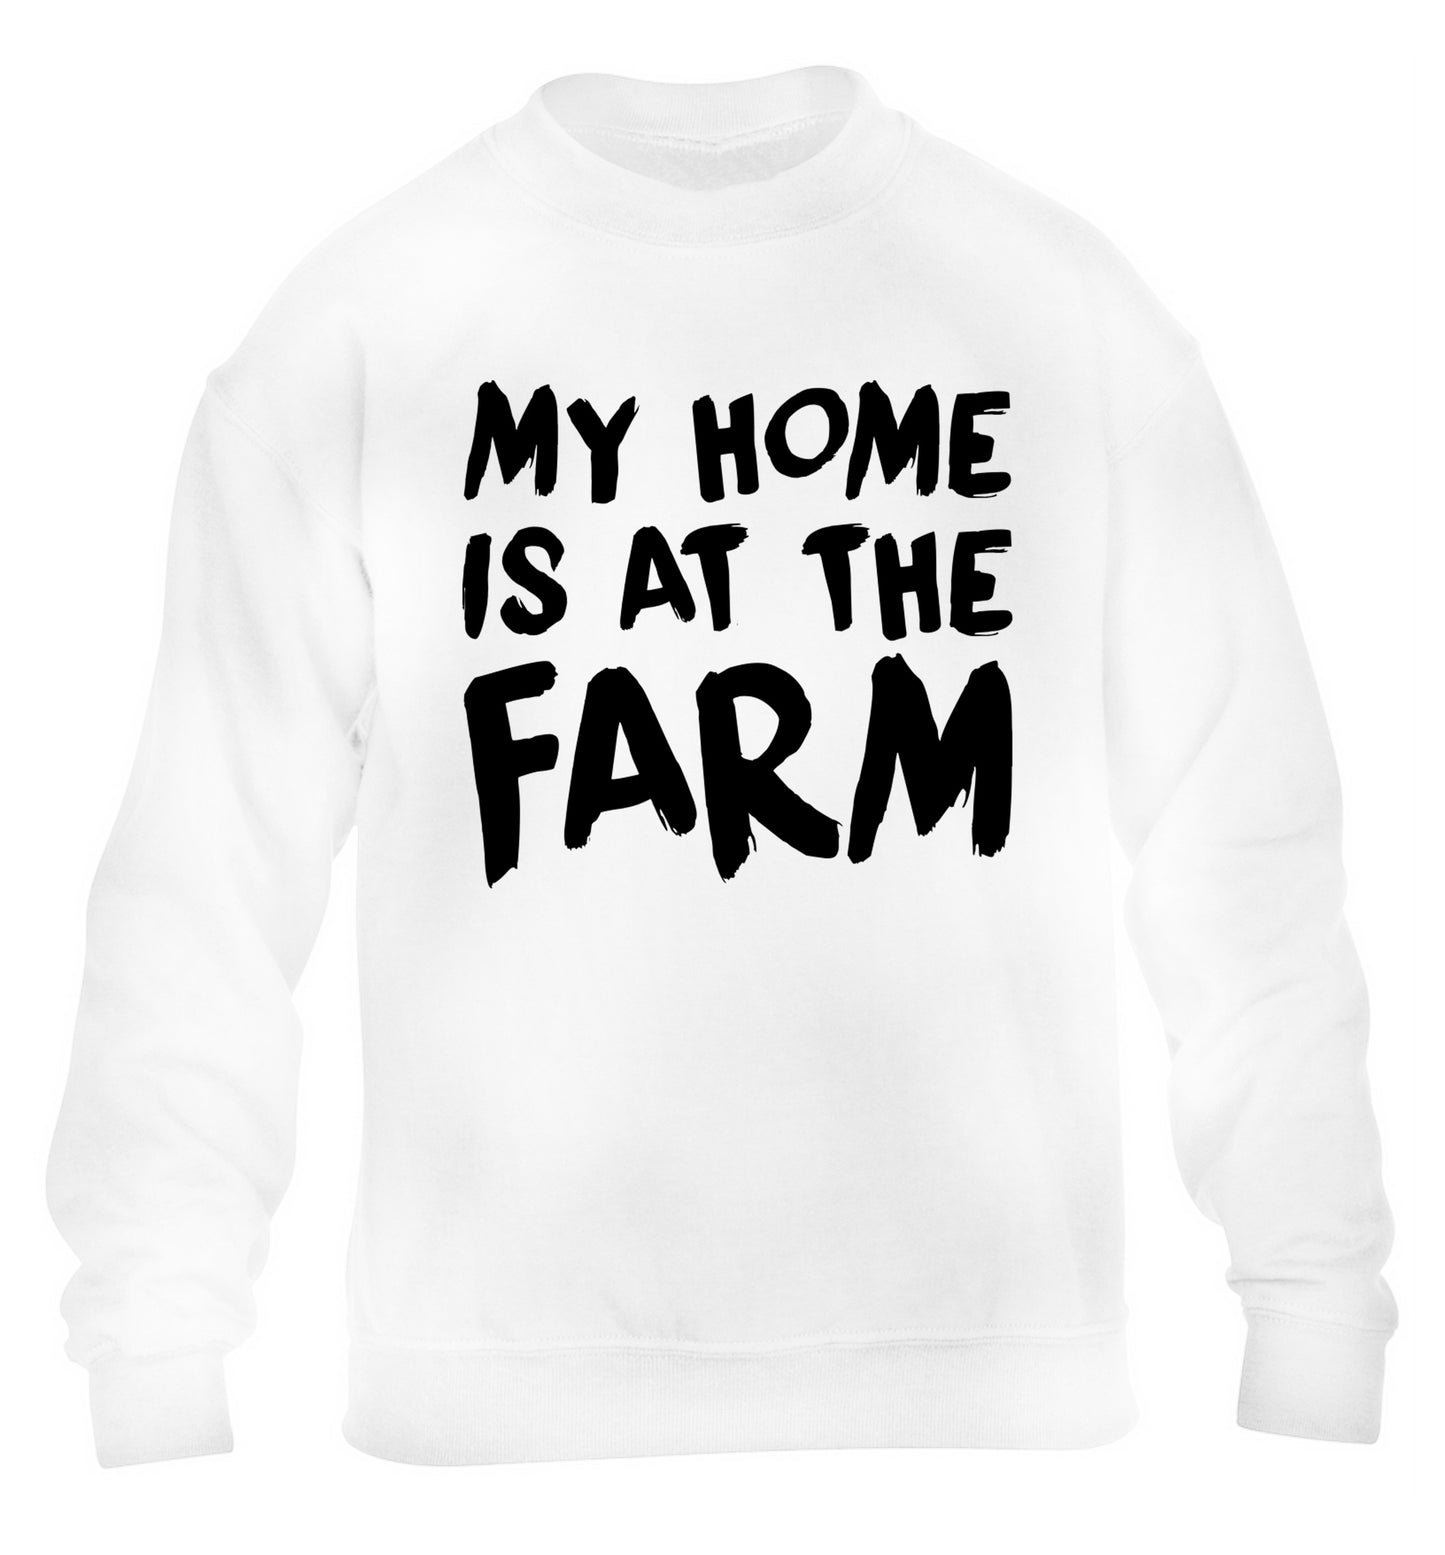 My home is at the farm children's white sweater 12-14 Years